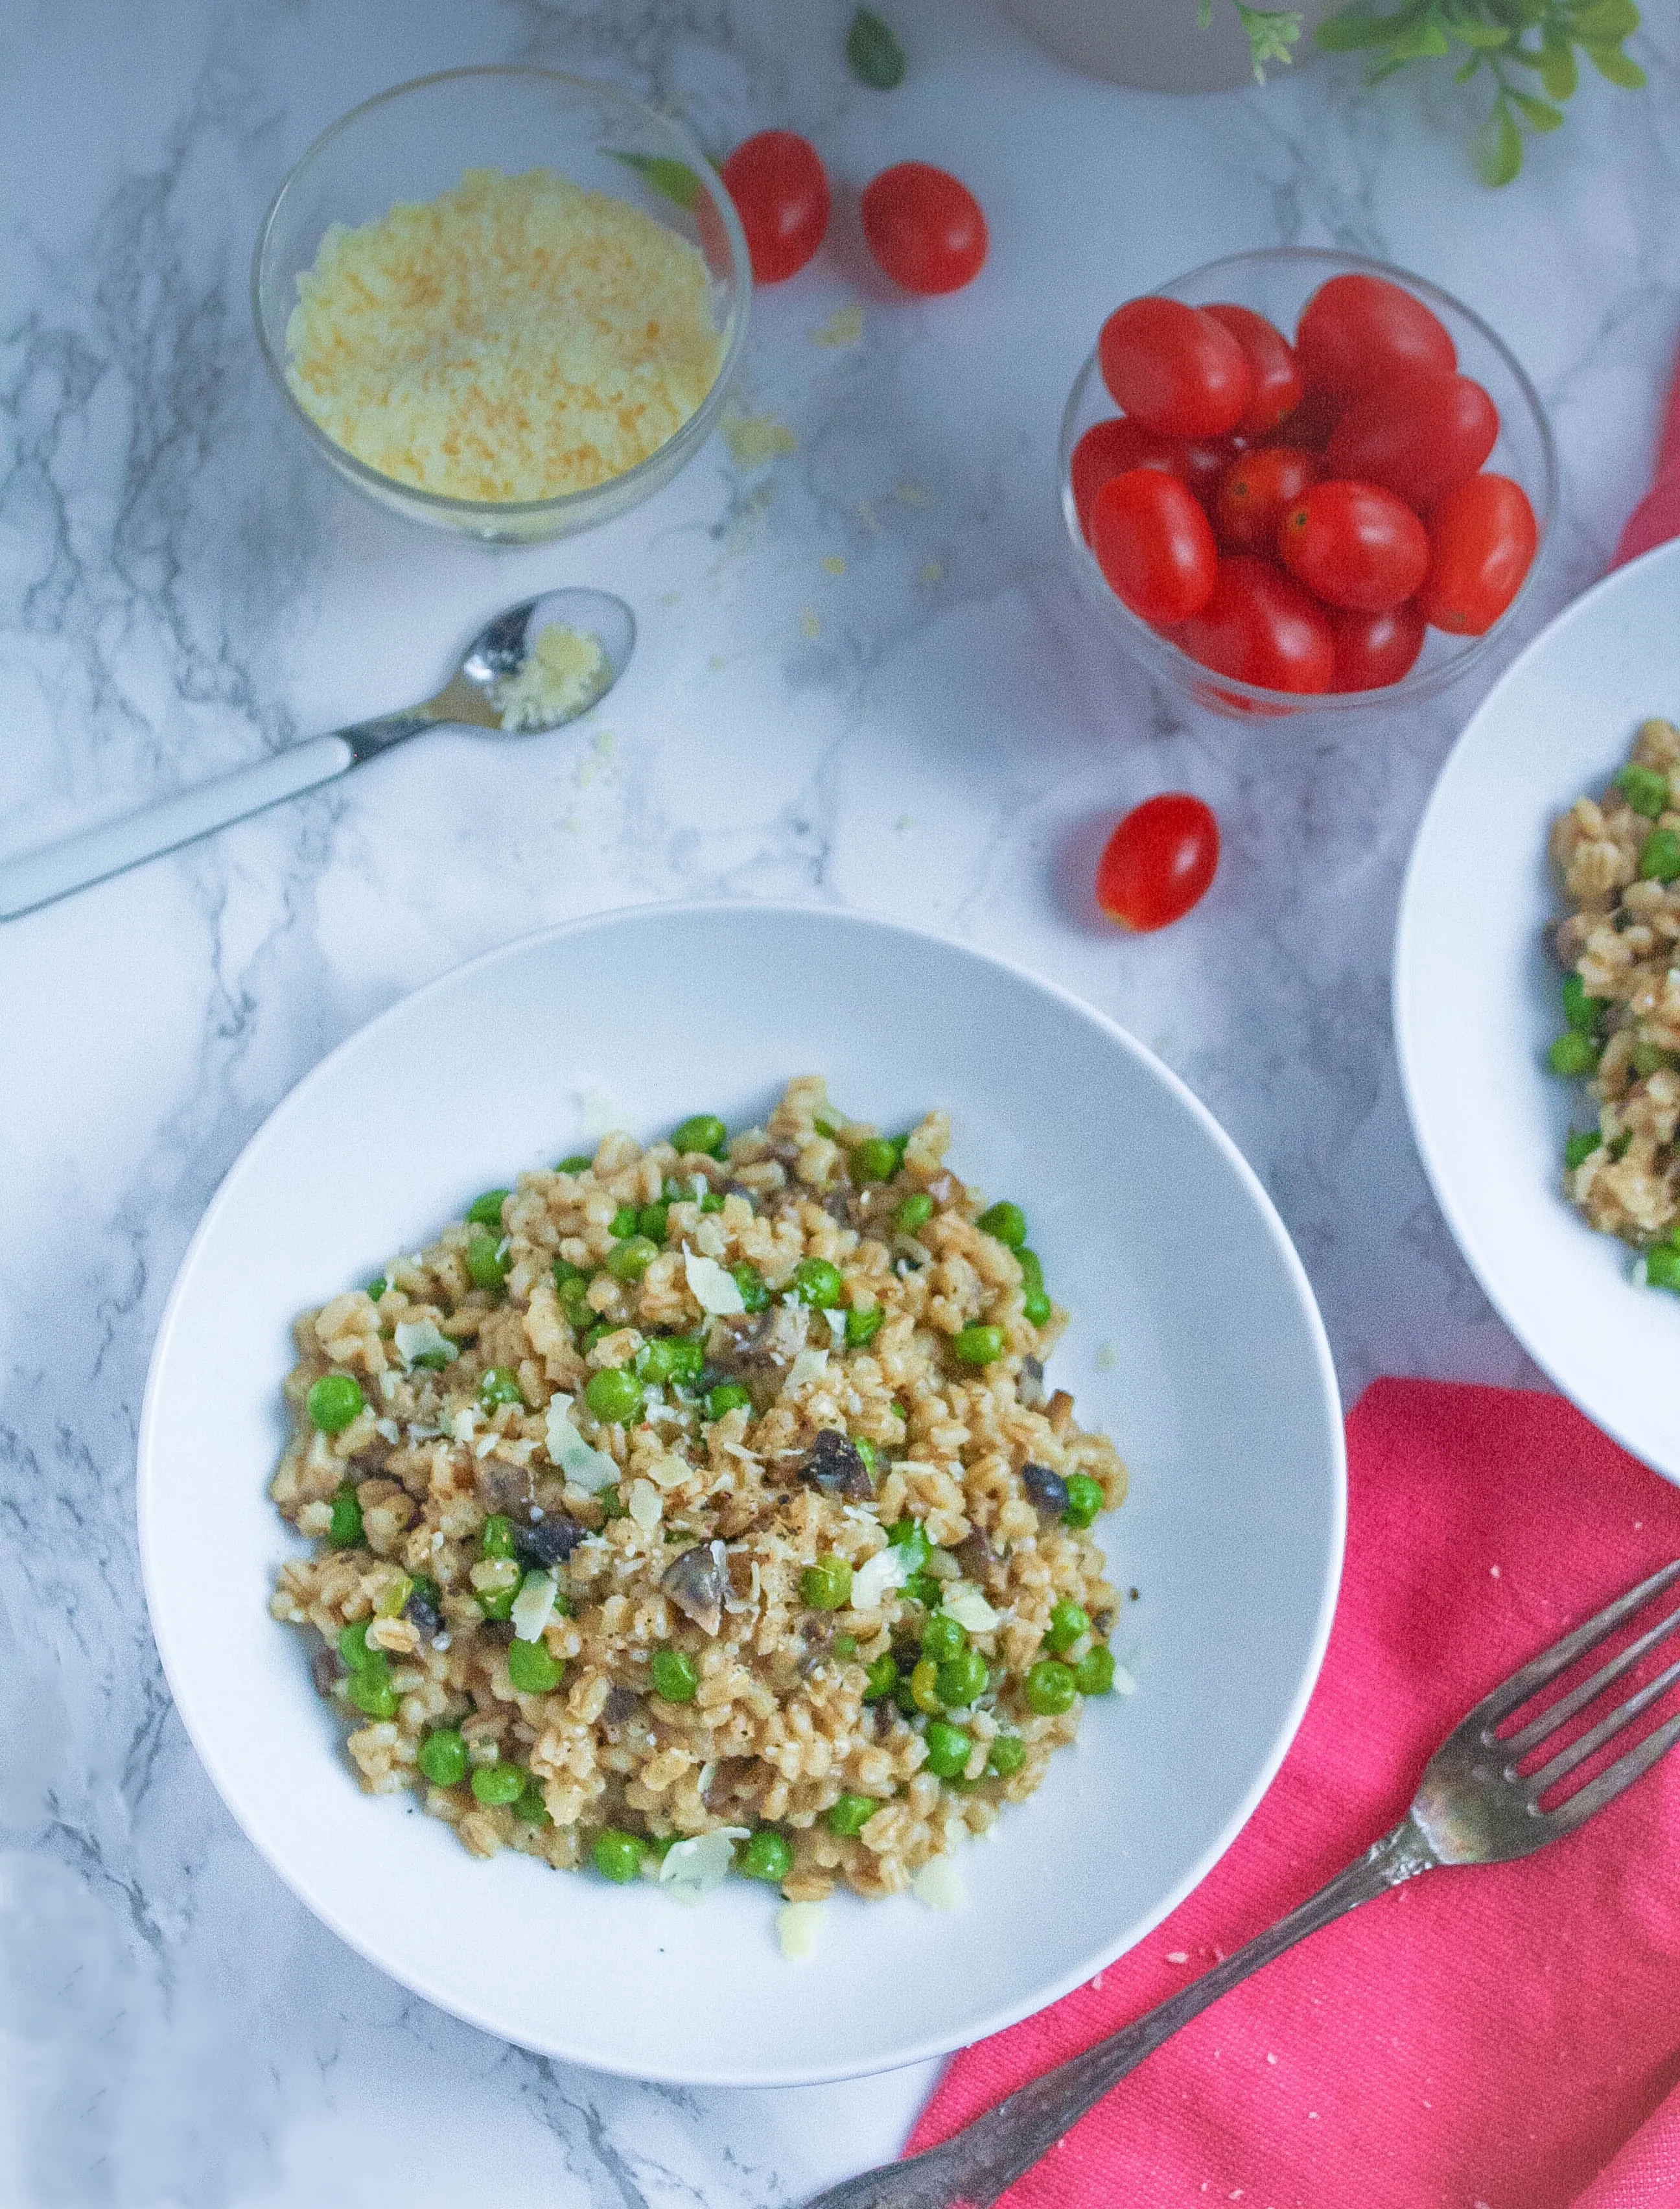 Barley Risotto with Mushrooms and Peas is hearty thanks to the barley. You'll enjoy this Barley Risotto with Mushrooms and Peas any night of the week.